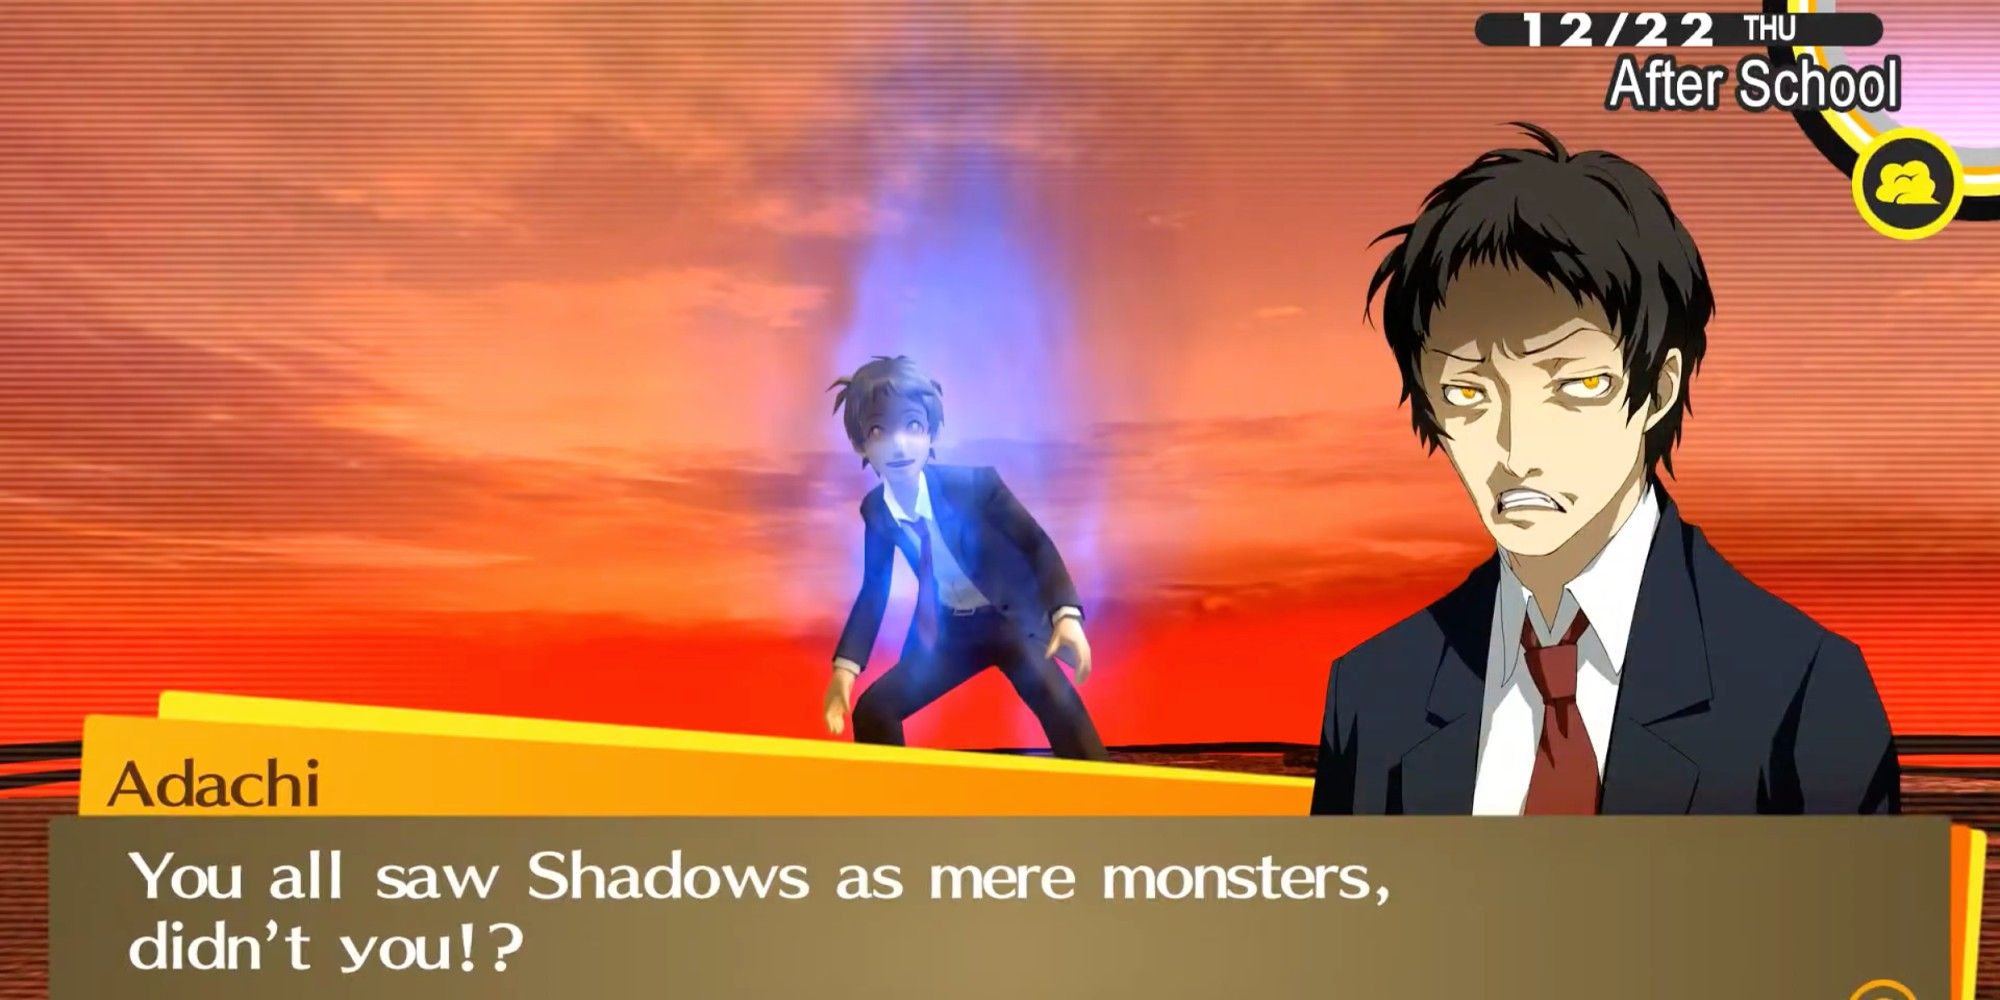 Adachi in blue flames stands against an strange orange sunset. A portrait of Adachi is in the bottom right of the screen. He asks about the shadows being monsters - Persona 4